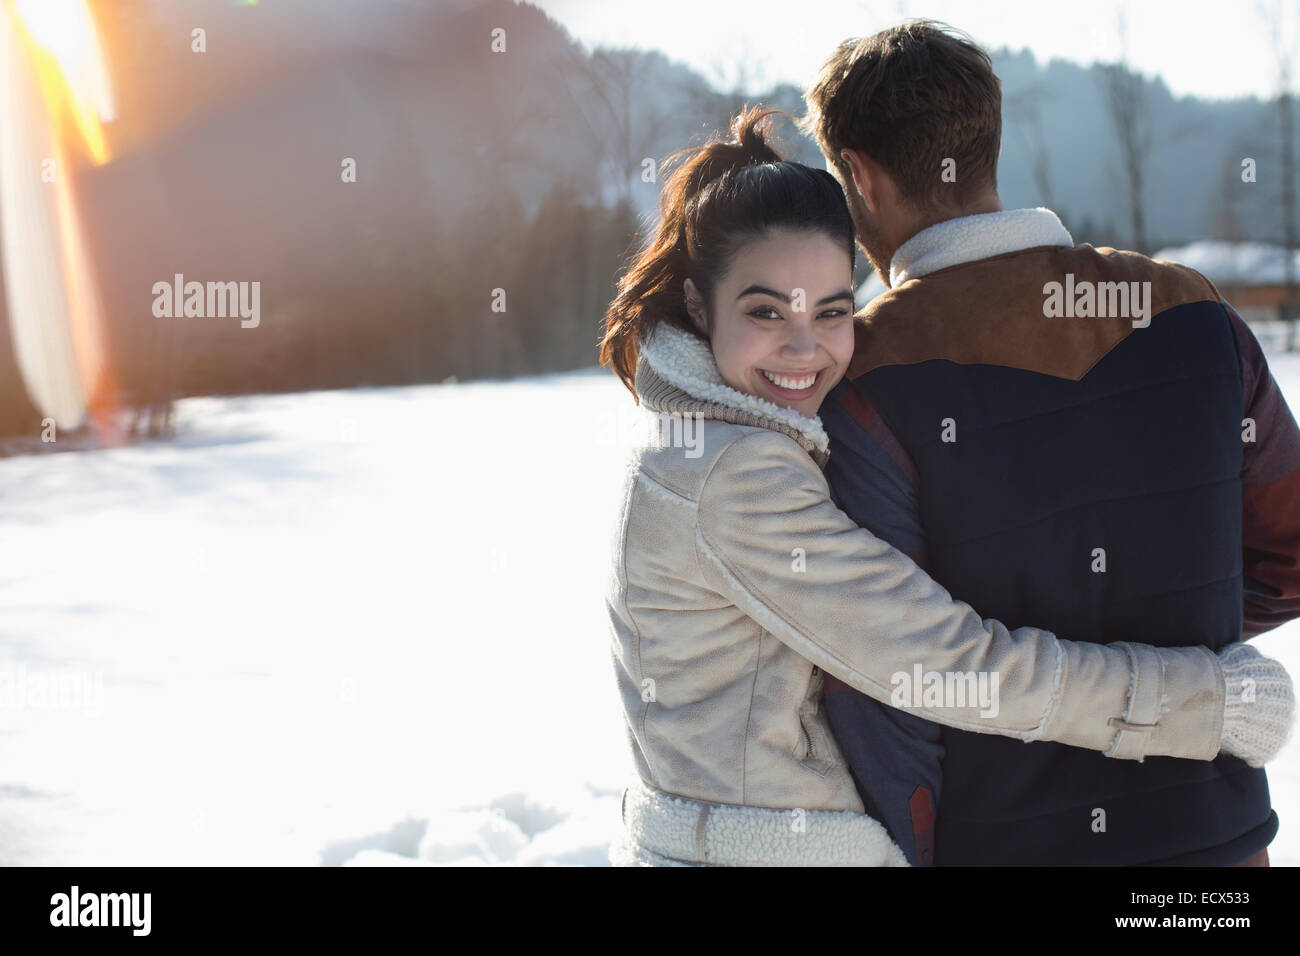 Couple hugging in snow Banque D'Images